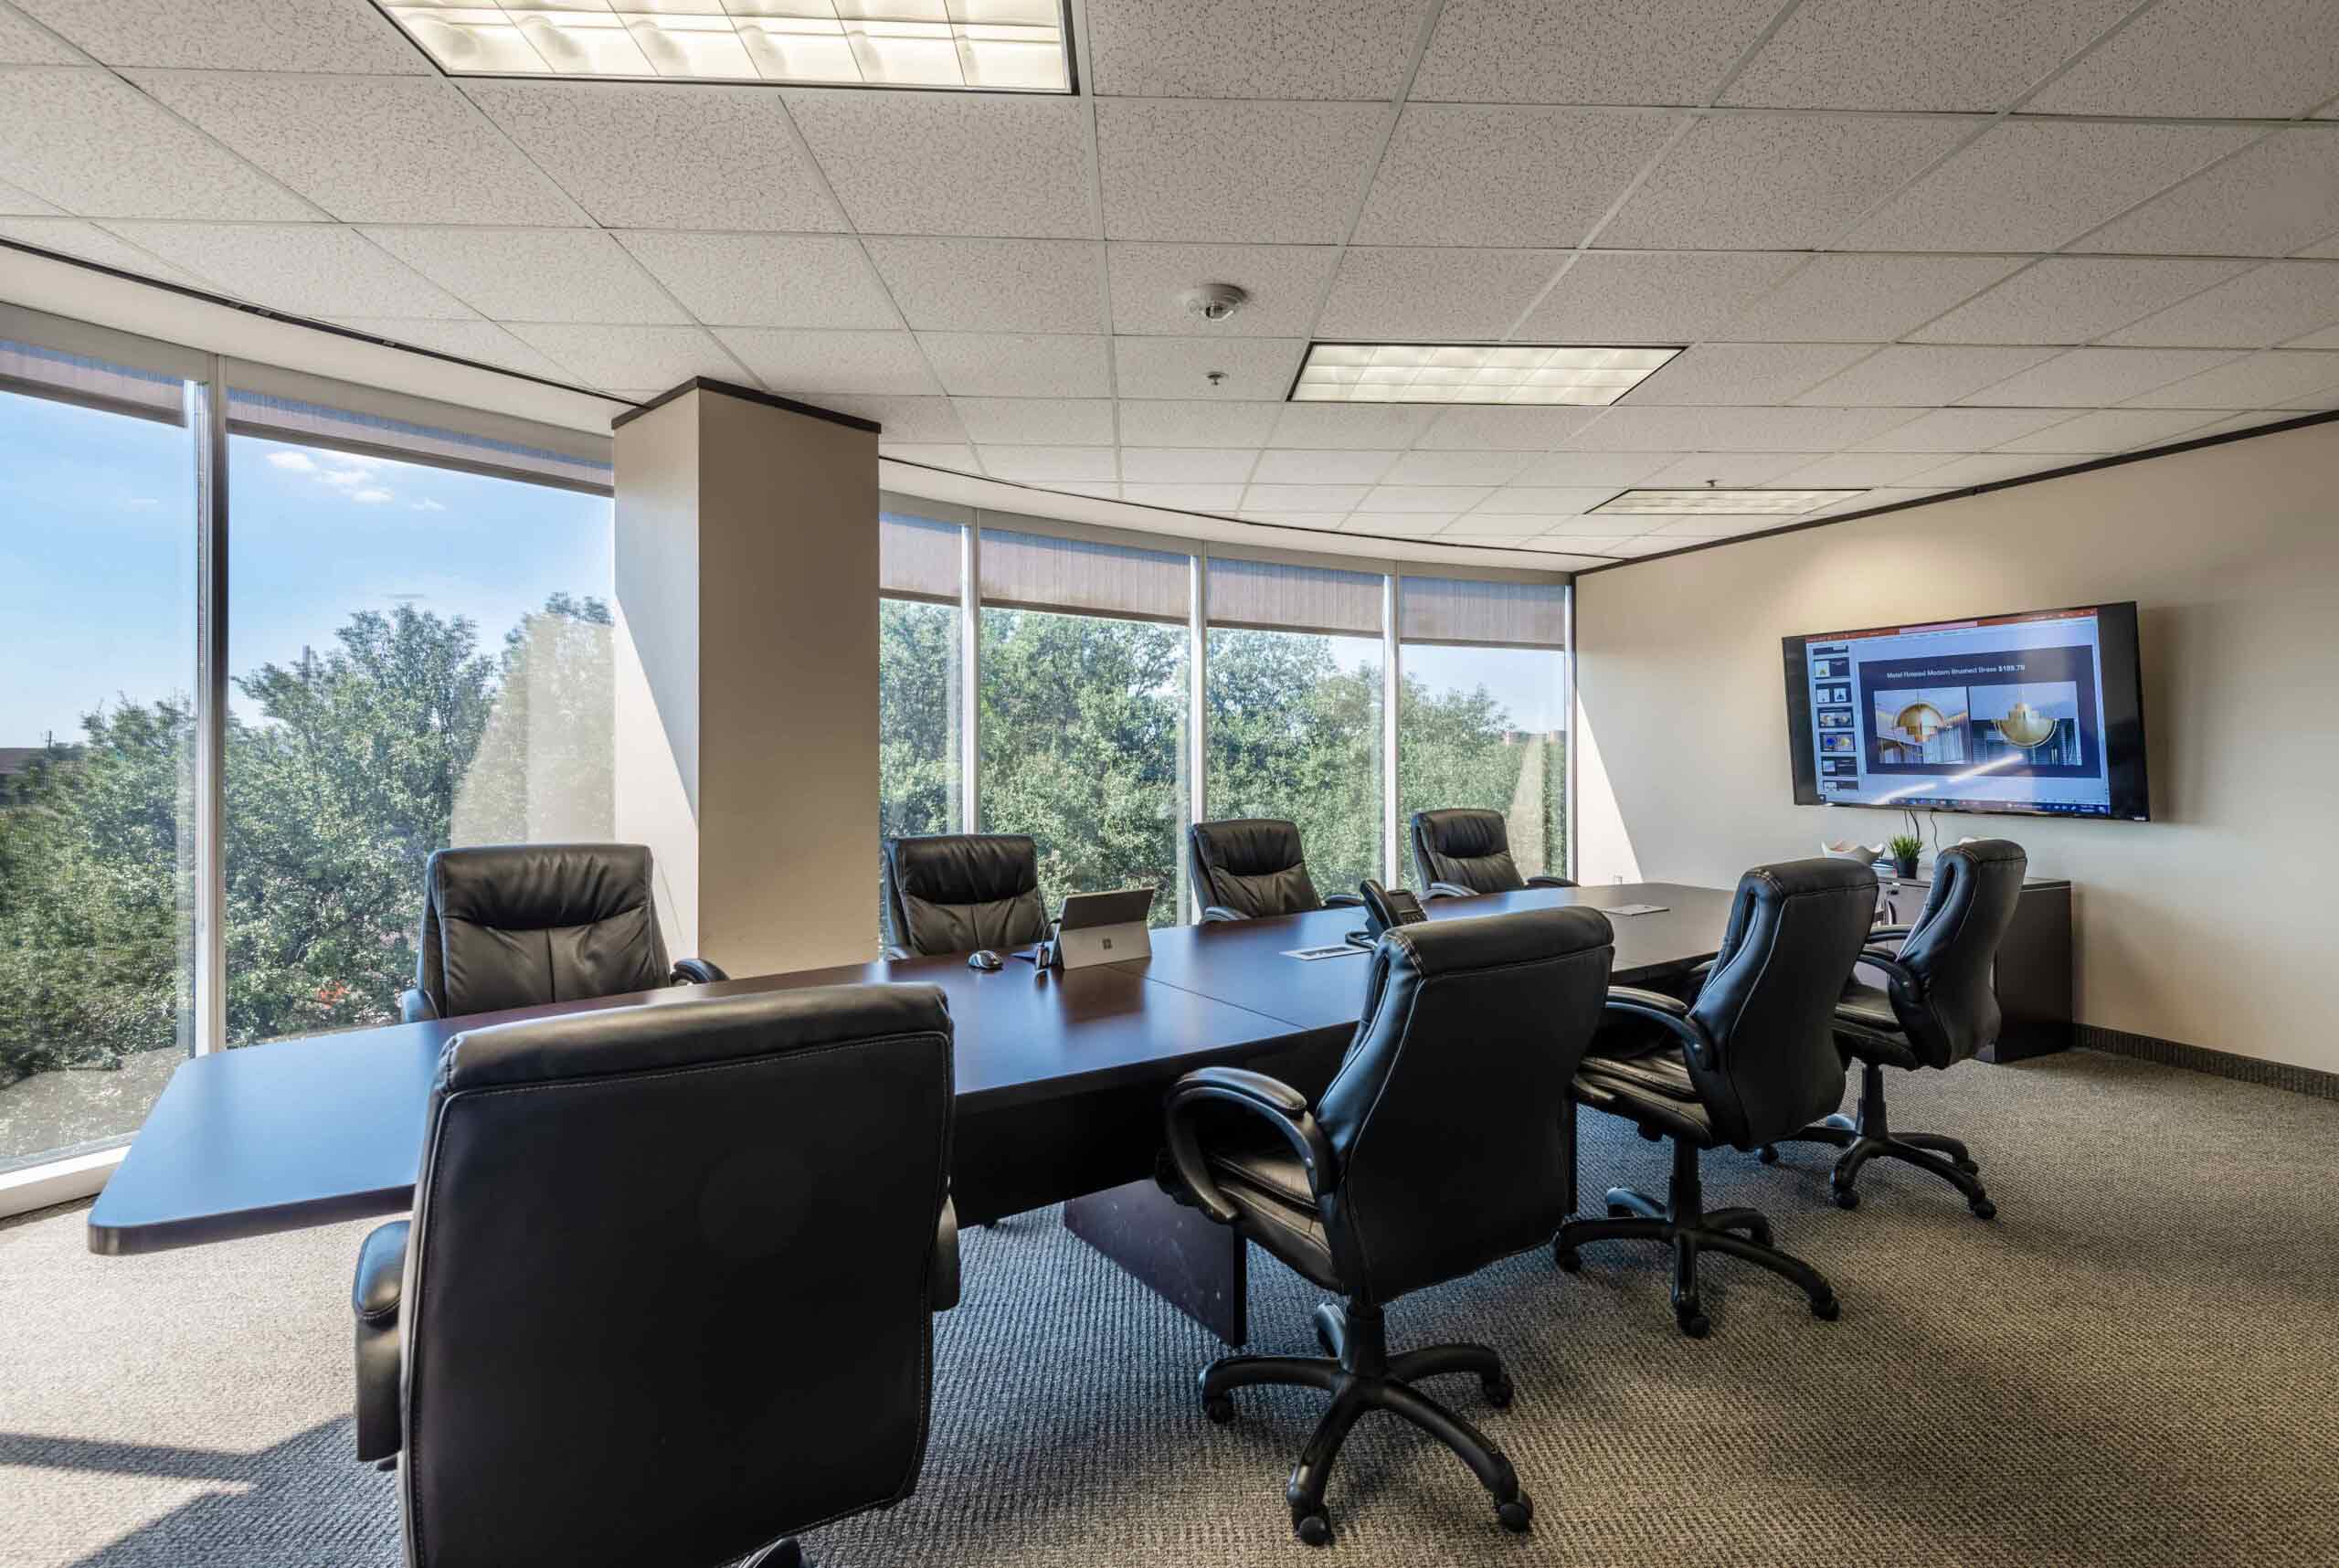 Conference room in North Dallas. Meeting table seats 8 and TV is provided.